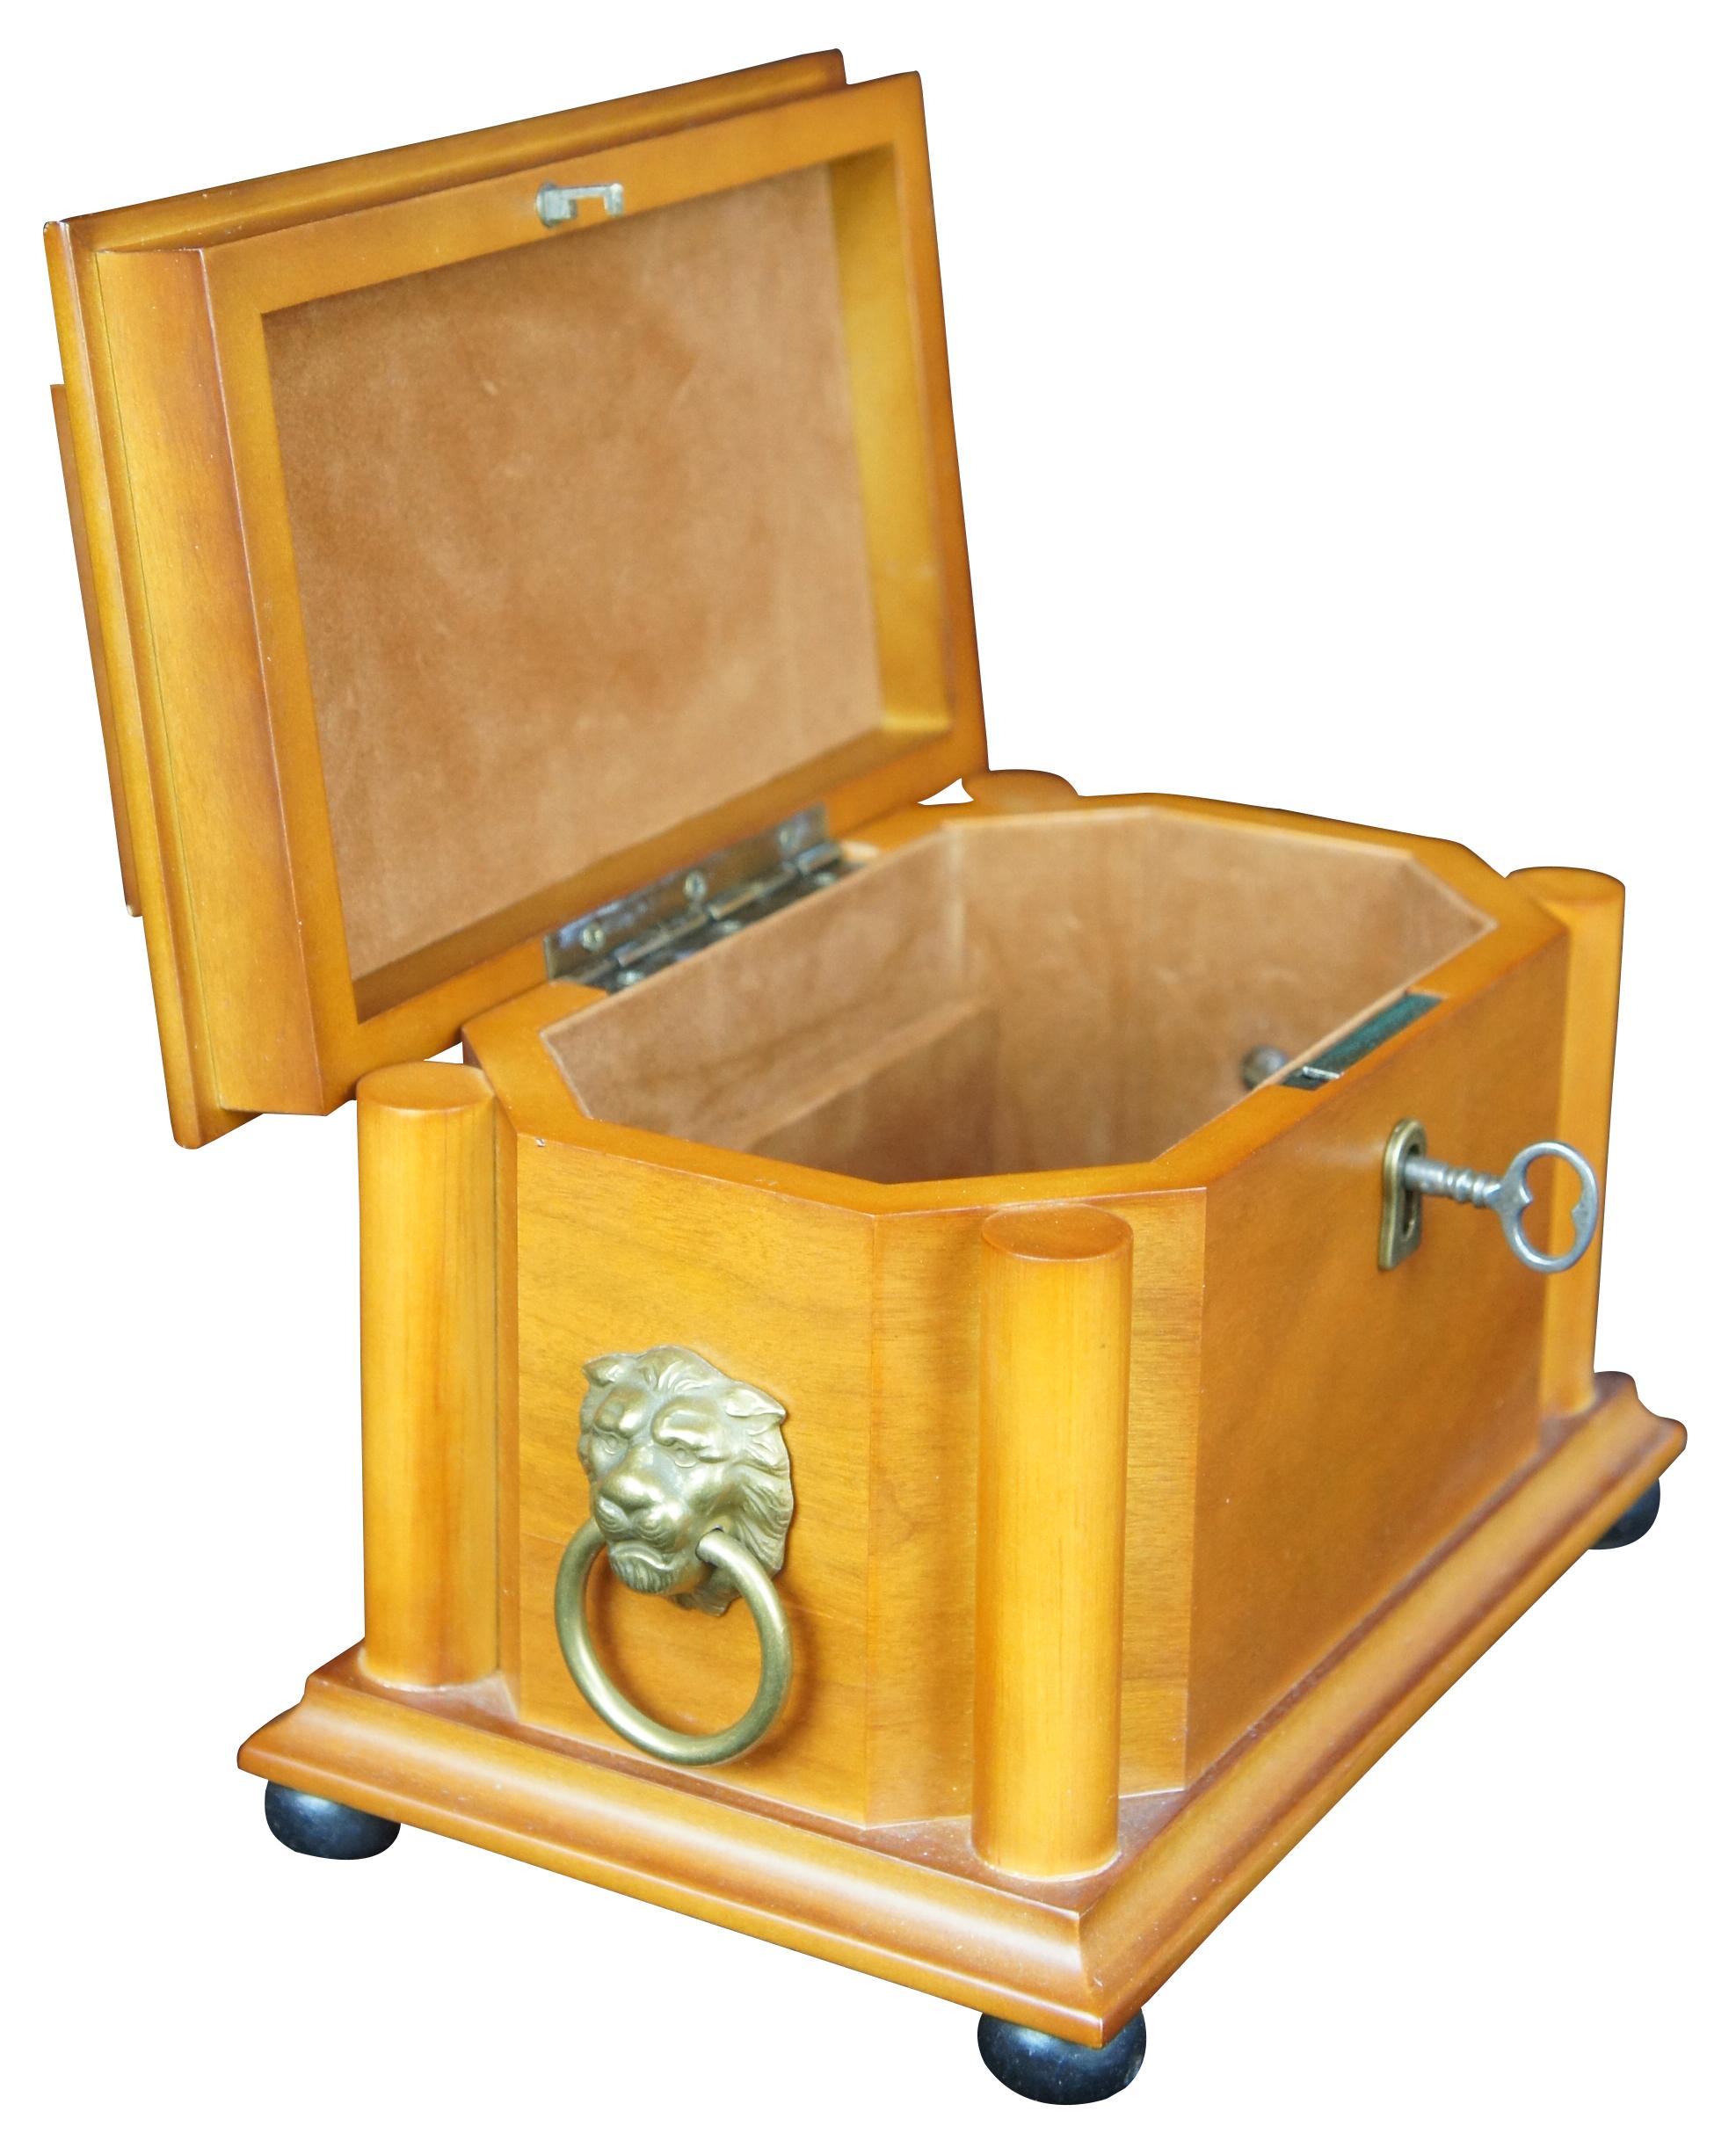 Vintage Empire/Neoclassical style keepsake valet box featuring tiered form with velvet lining, corinthian columns, lion head handles, footed base, and lock & key.
 